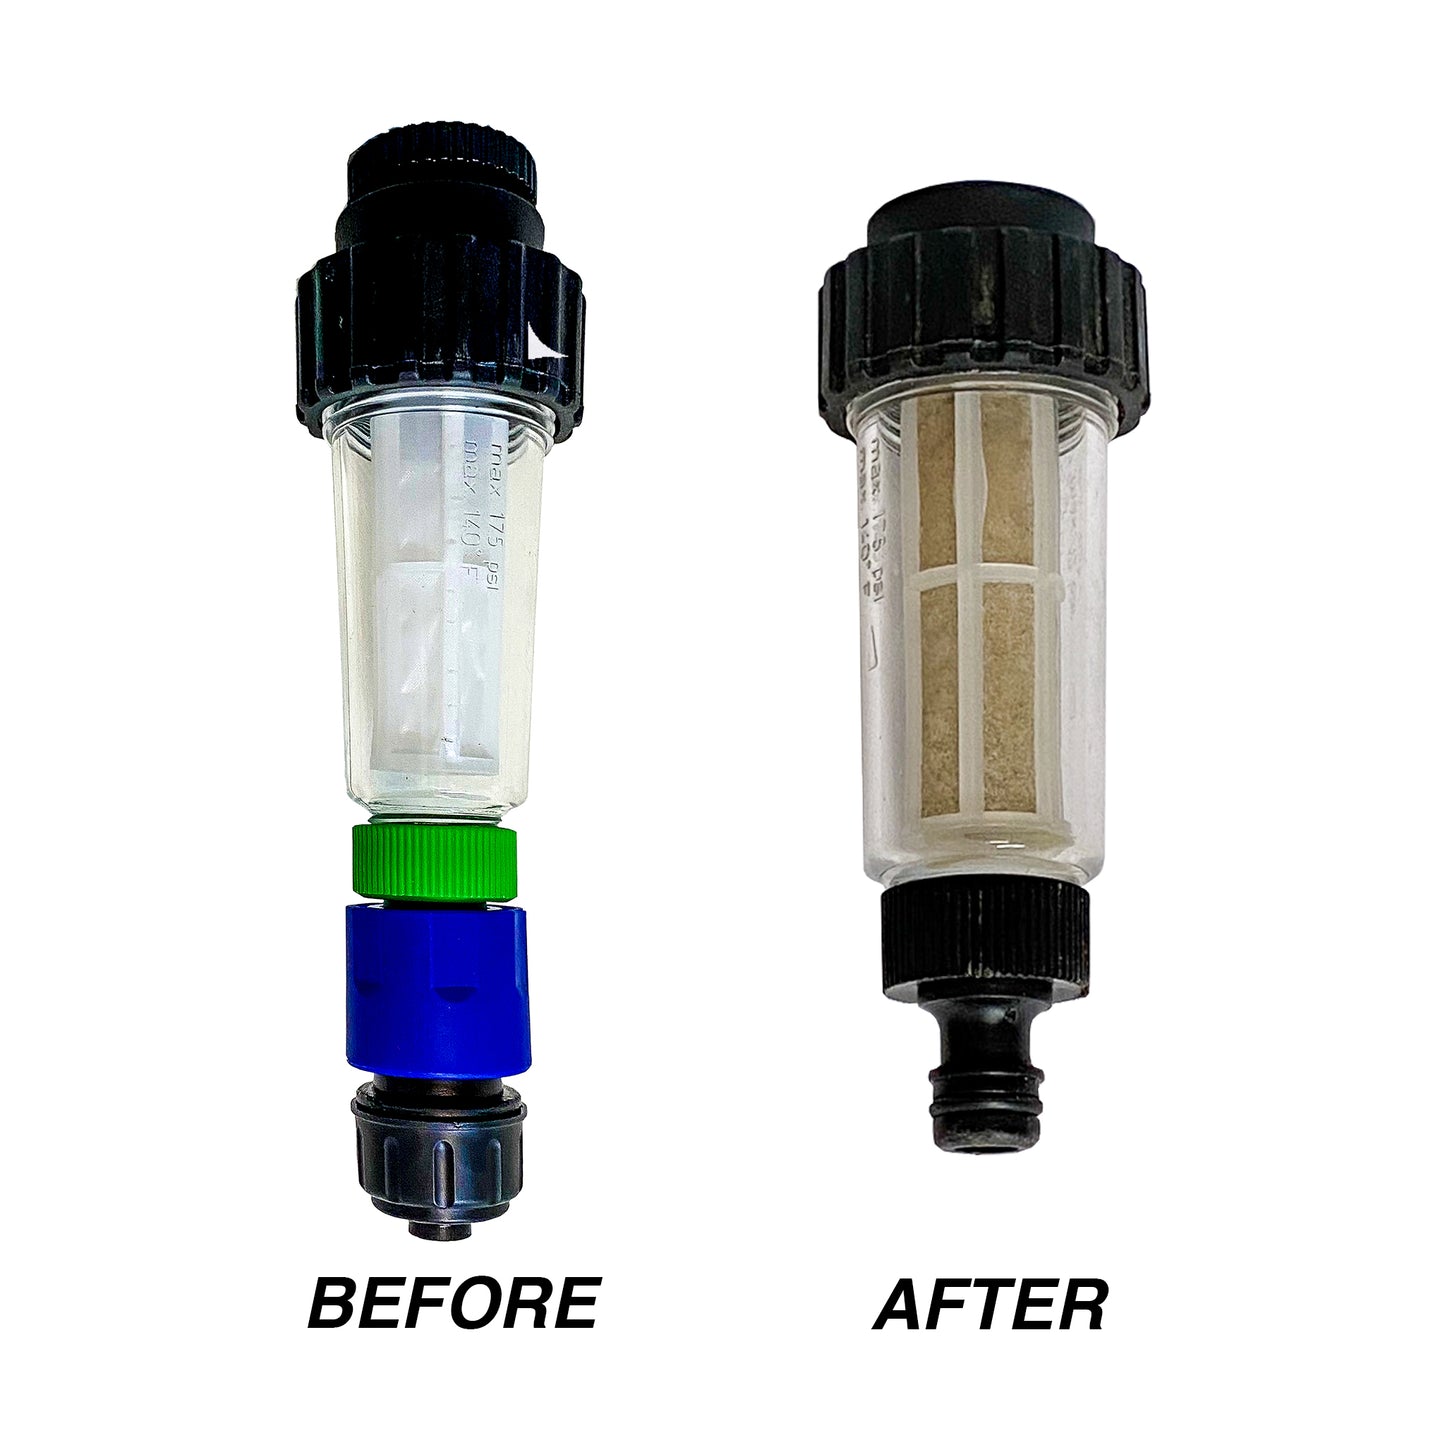 200-Micron-Water-Filter-Before-After-Dirt-Debris